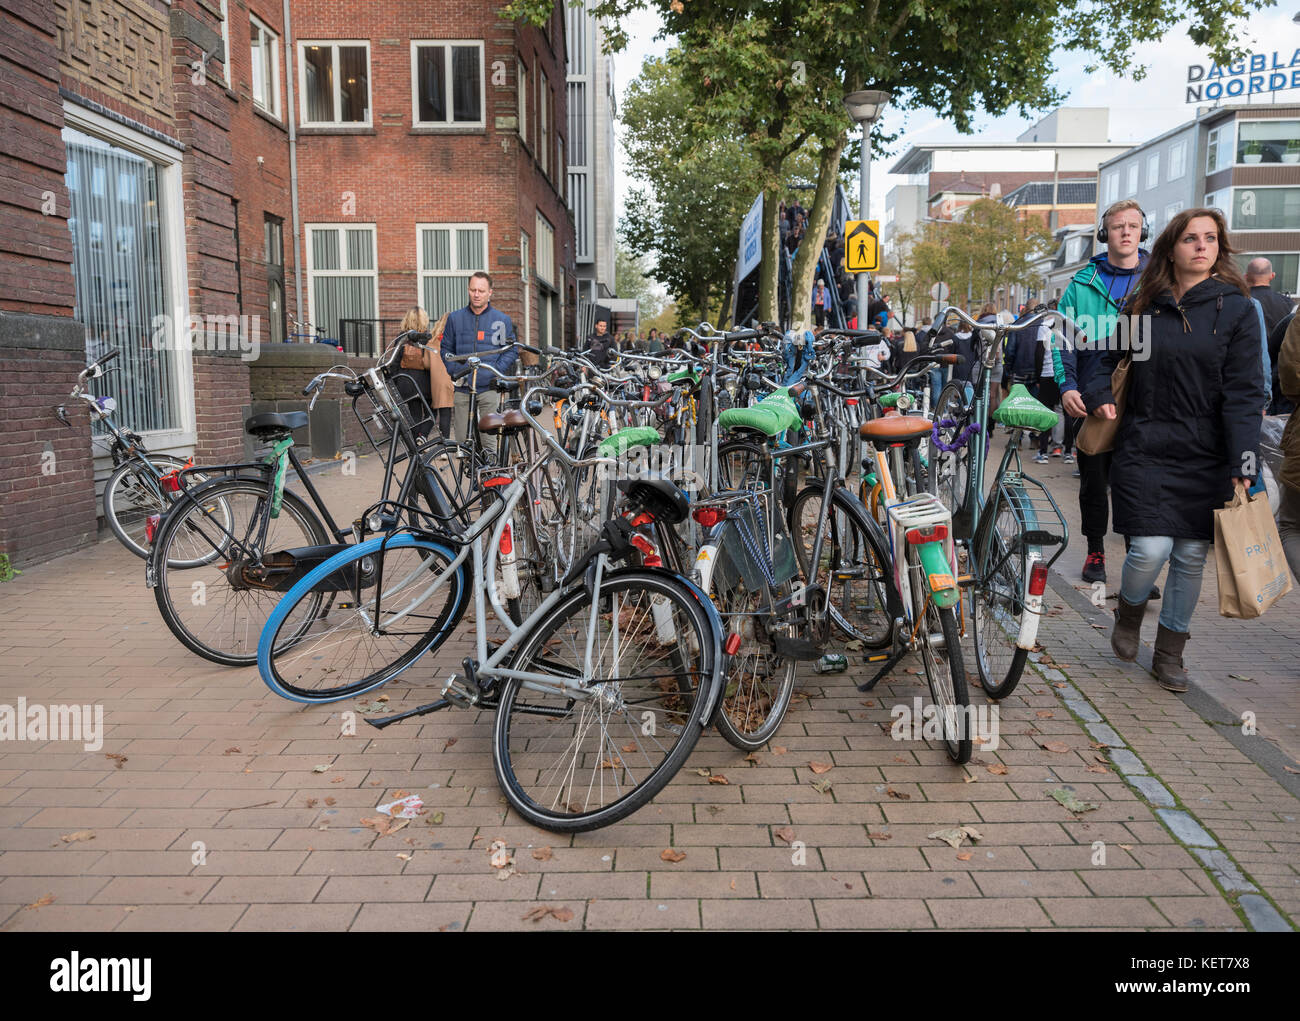 lot of bicycles block pavement of city centre in groningen Stock Photo